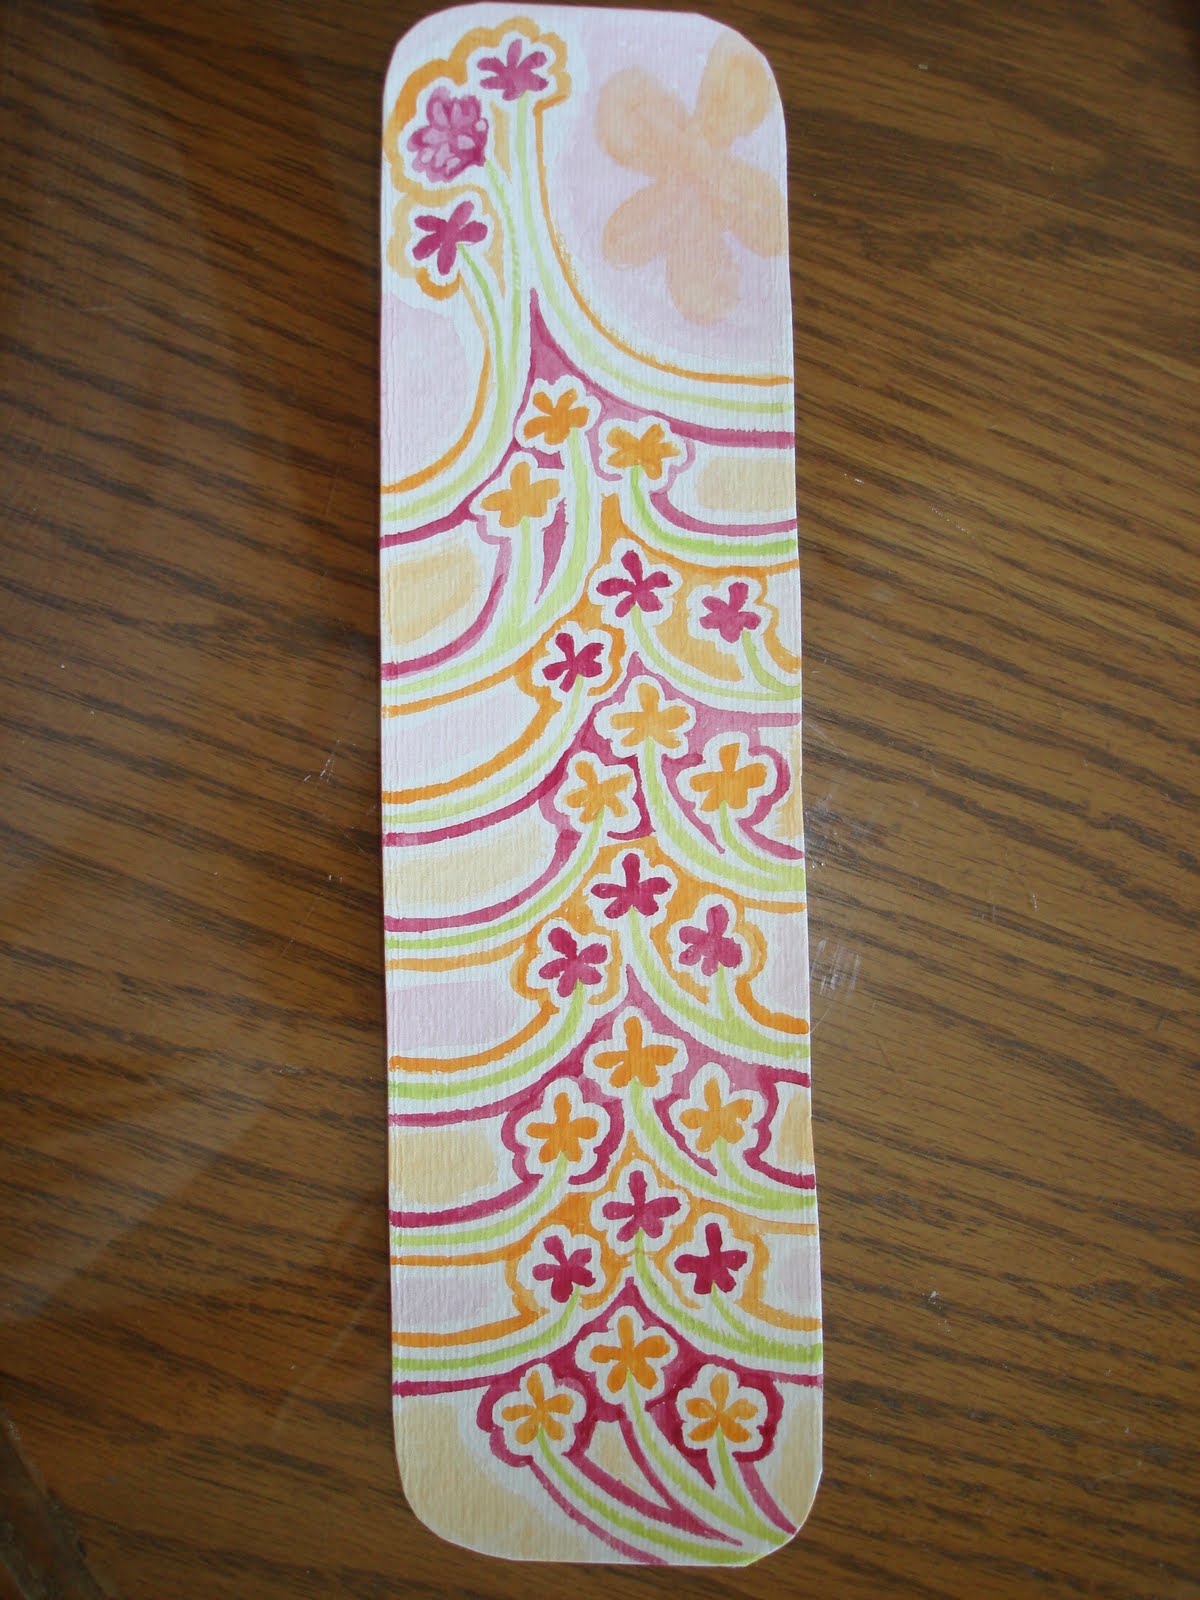 Read Away the Day: Homemade Bookmarks